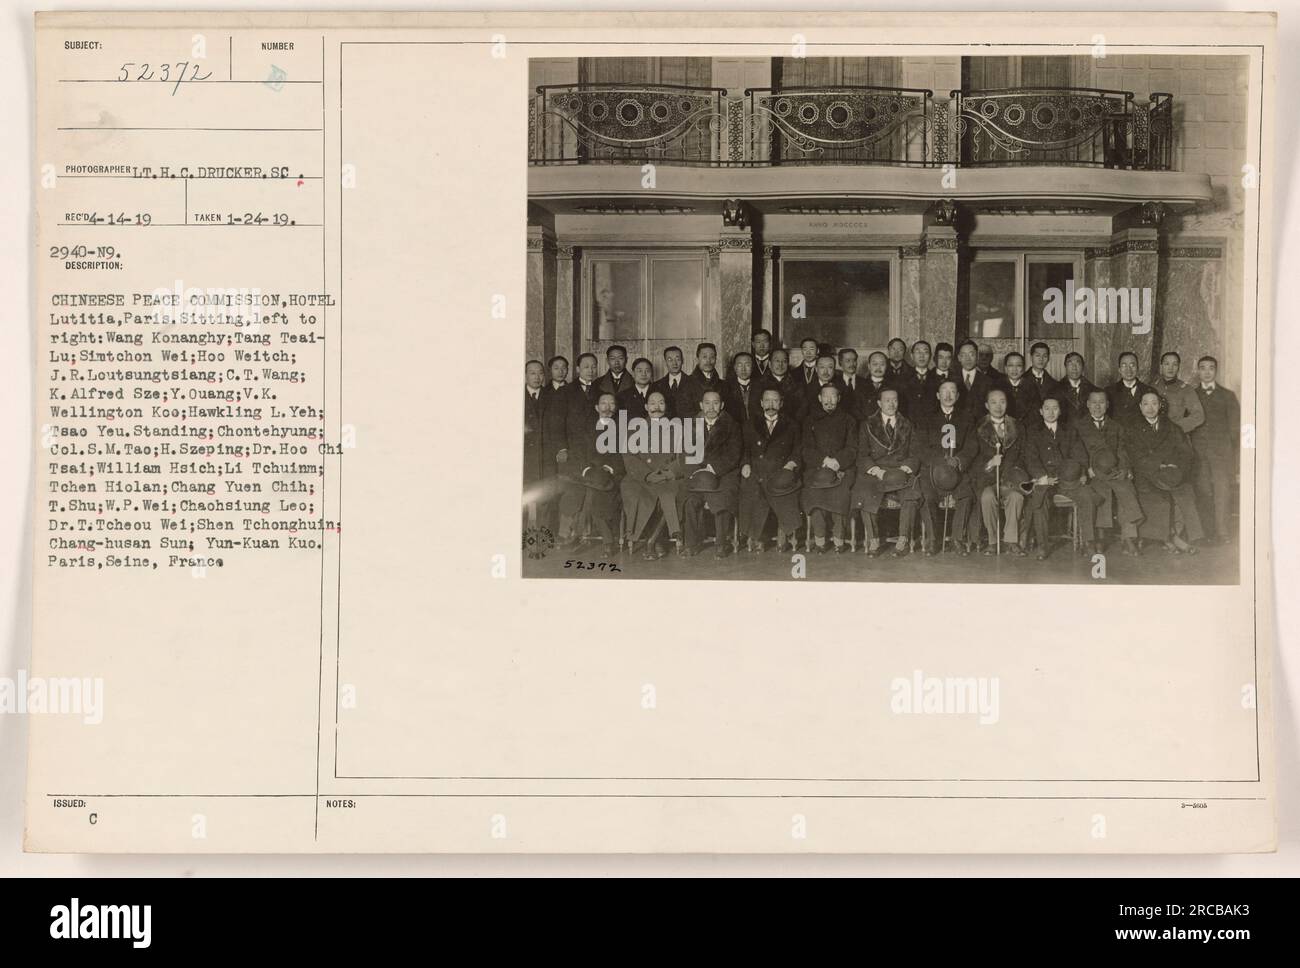 Chinese Peace Commission, Hotel Lutitia, Paris. Photograph taken on January 24, 1919, by photographer TT.H.C. Drucker. Caption describes the individuals in the photograph, including their names and positions. The photograph shows a group of Chinese delegates seated and standing together in a hotel room in Paris, France during World War I. Stock Photo